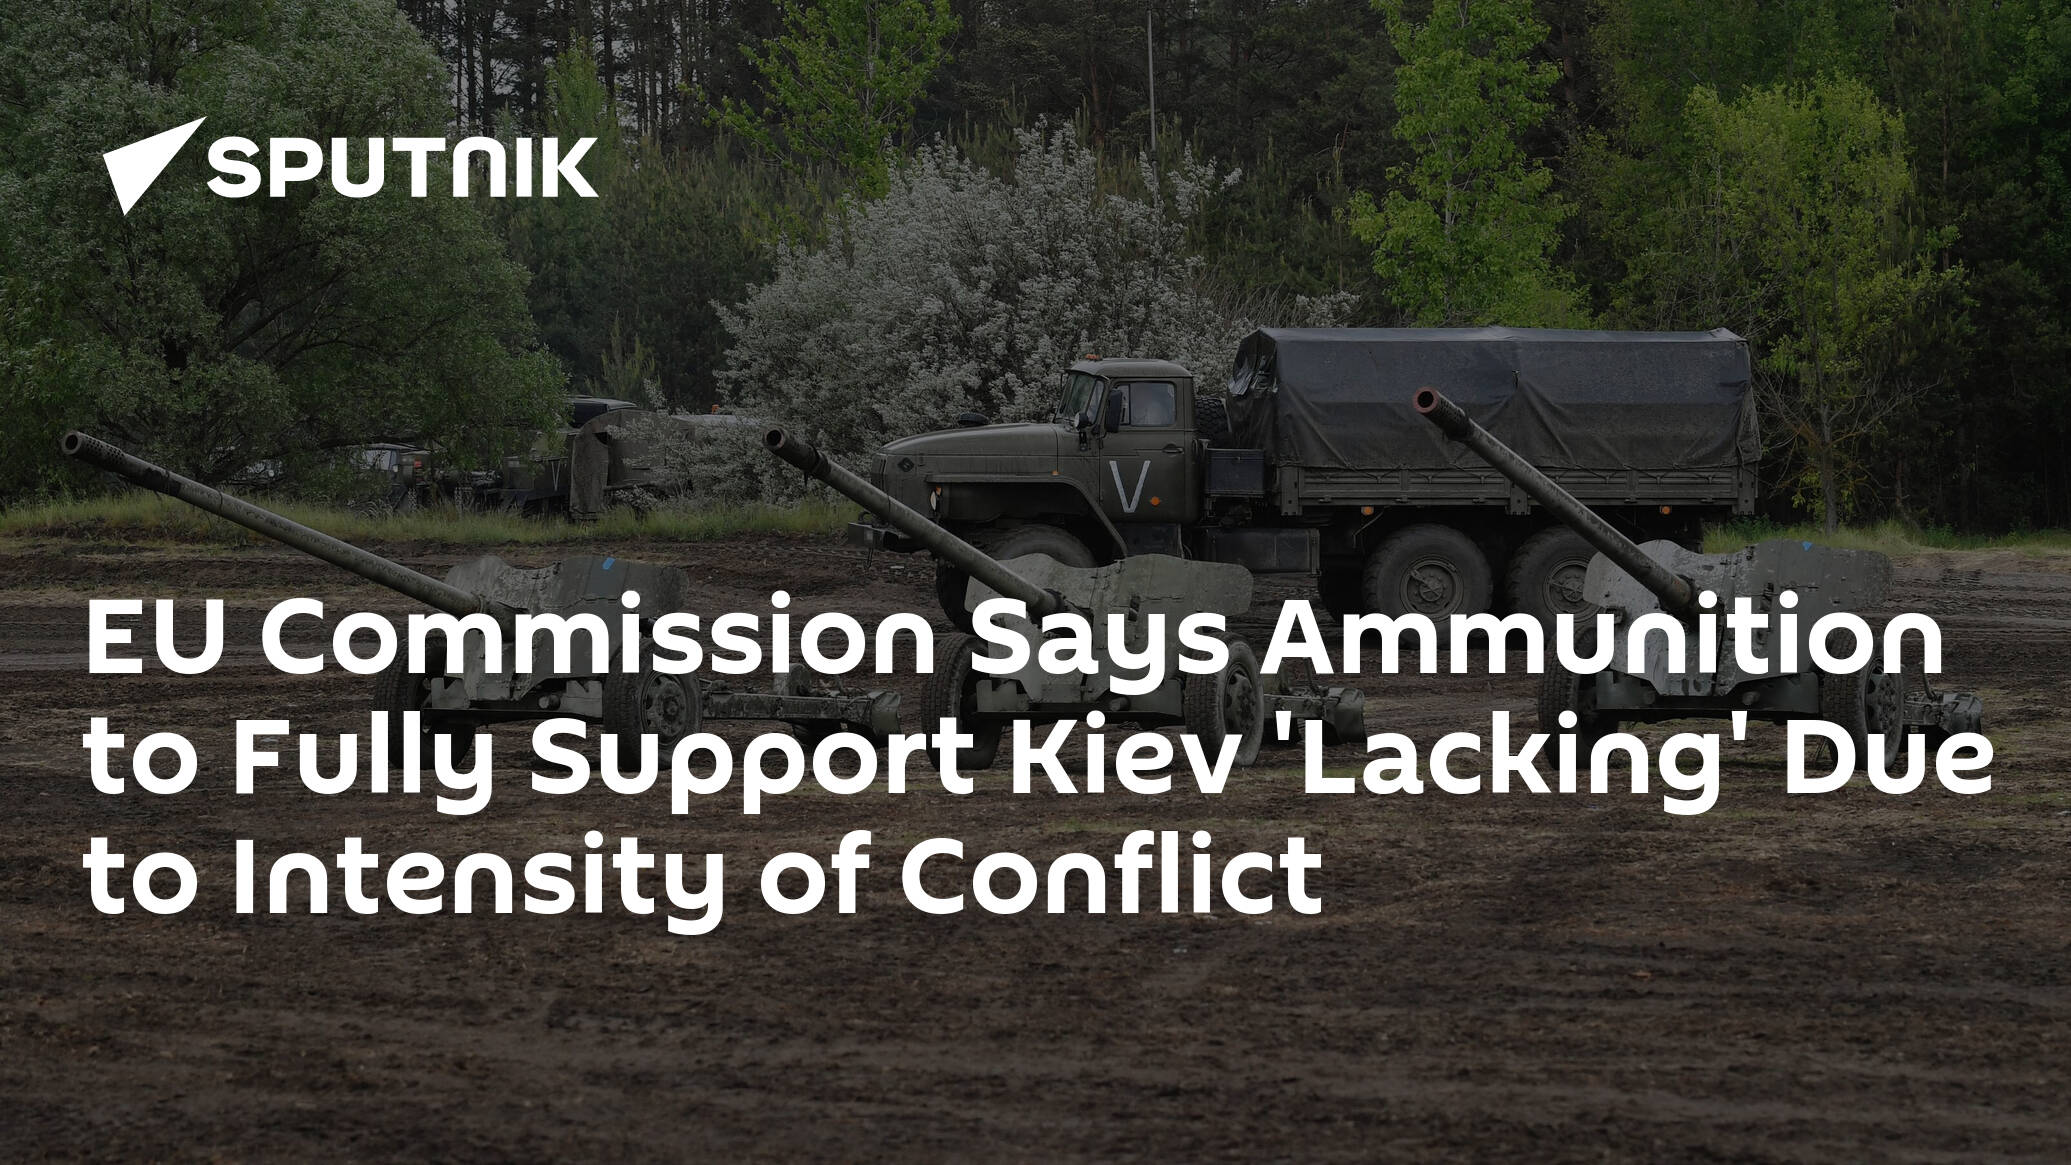 EU Commission Says Ammunition to Fully Support Kiev 'Lacking' Due to Intensity of Conflict